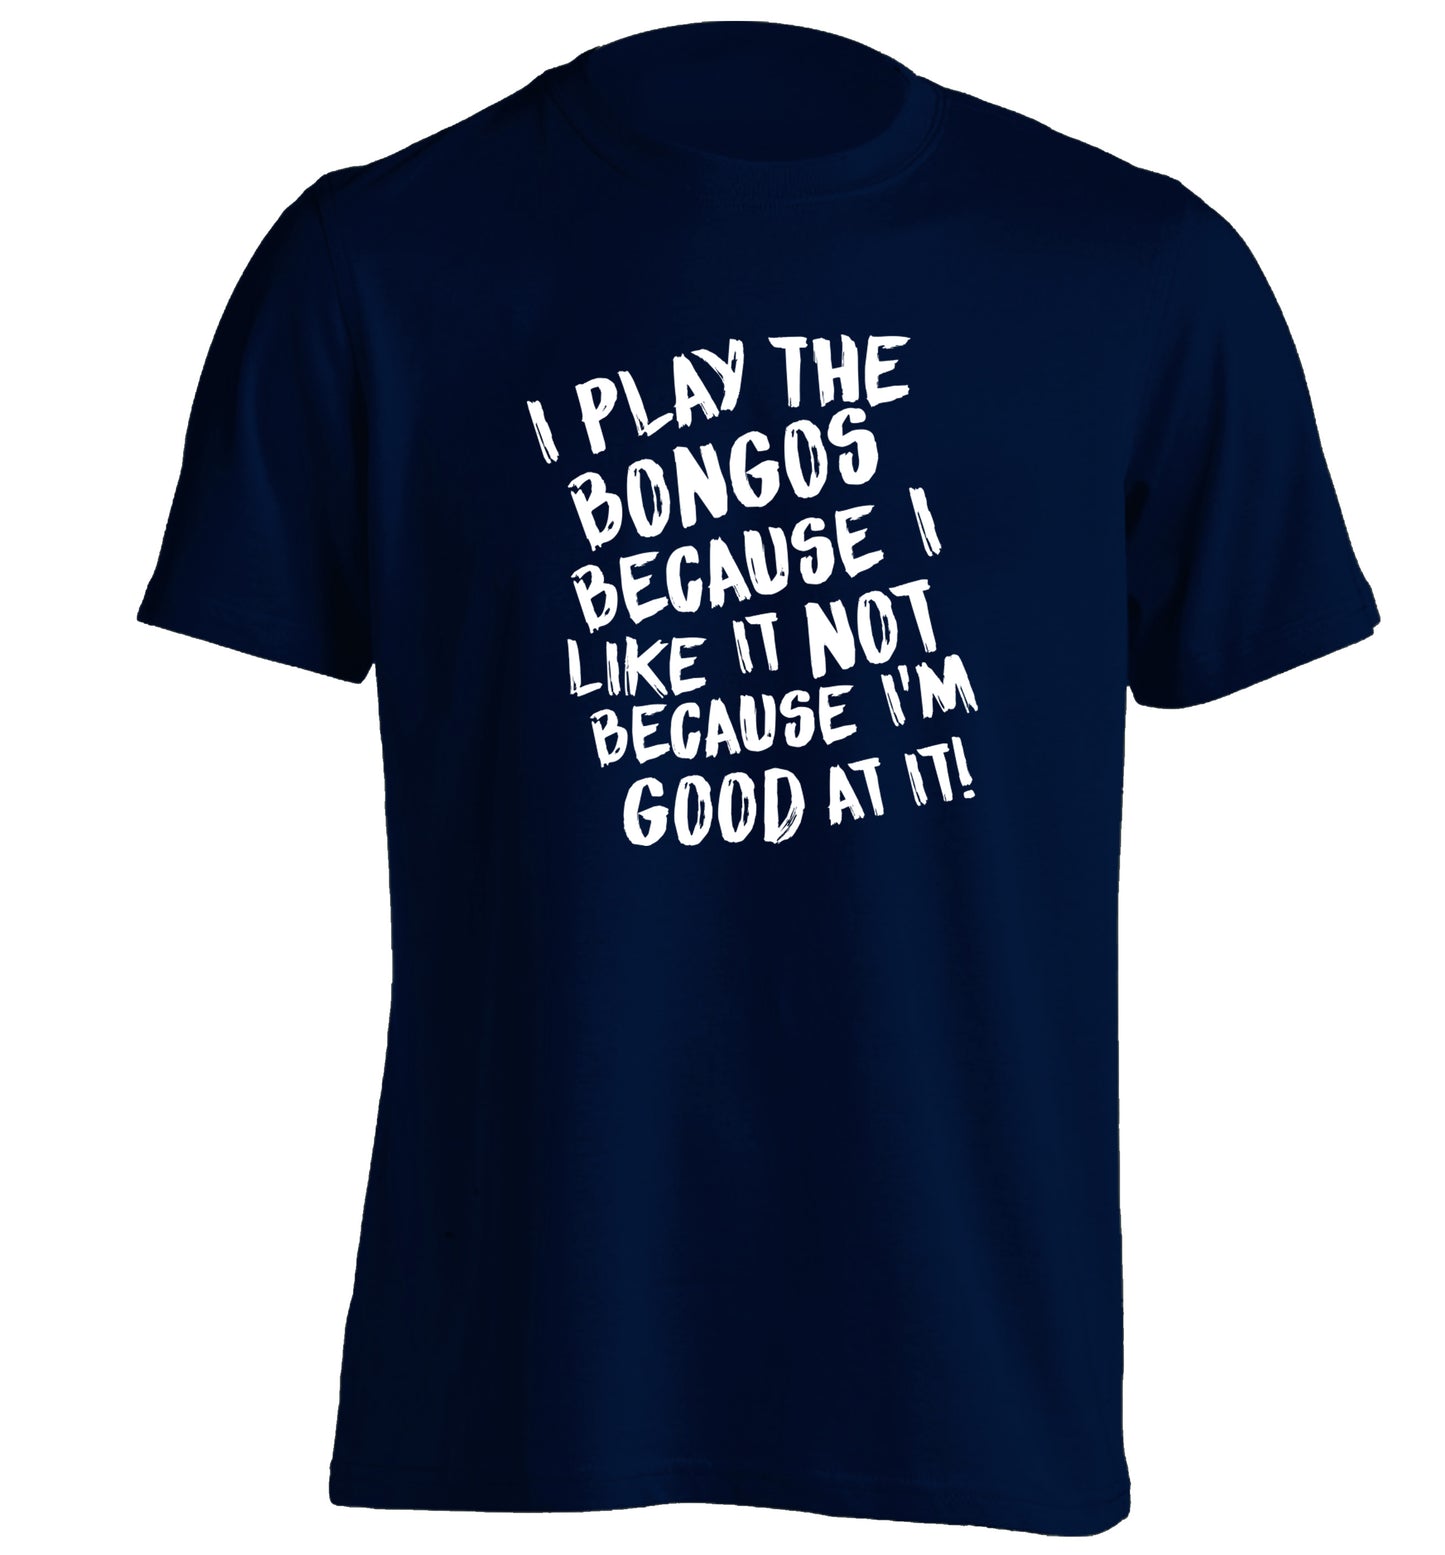 I play the bongos because I like it not because I'm good at it adults unisex navy Tshirt 2XL